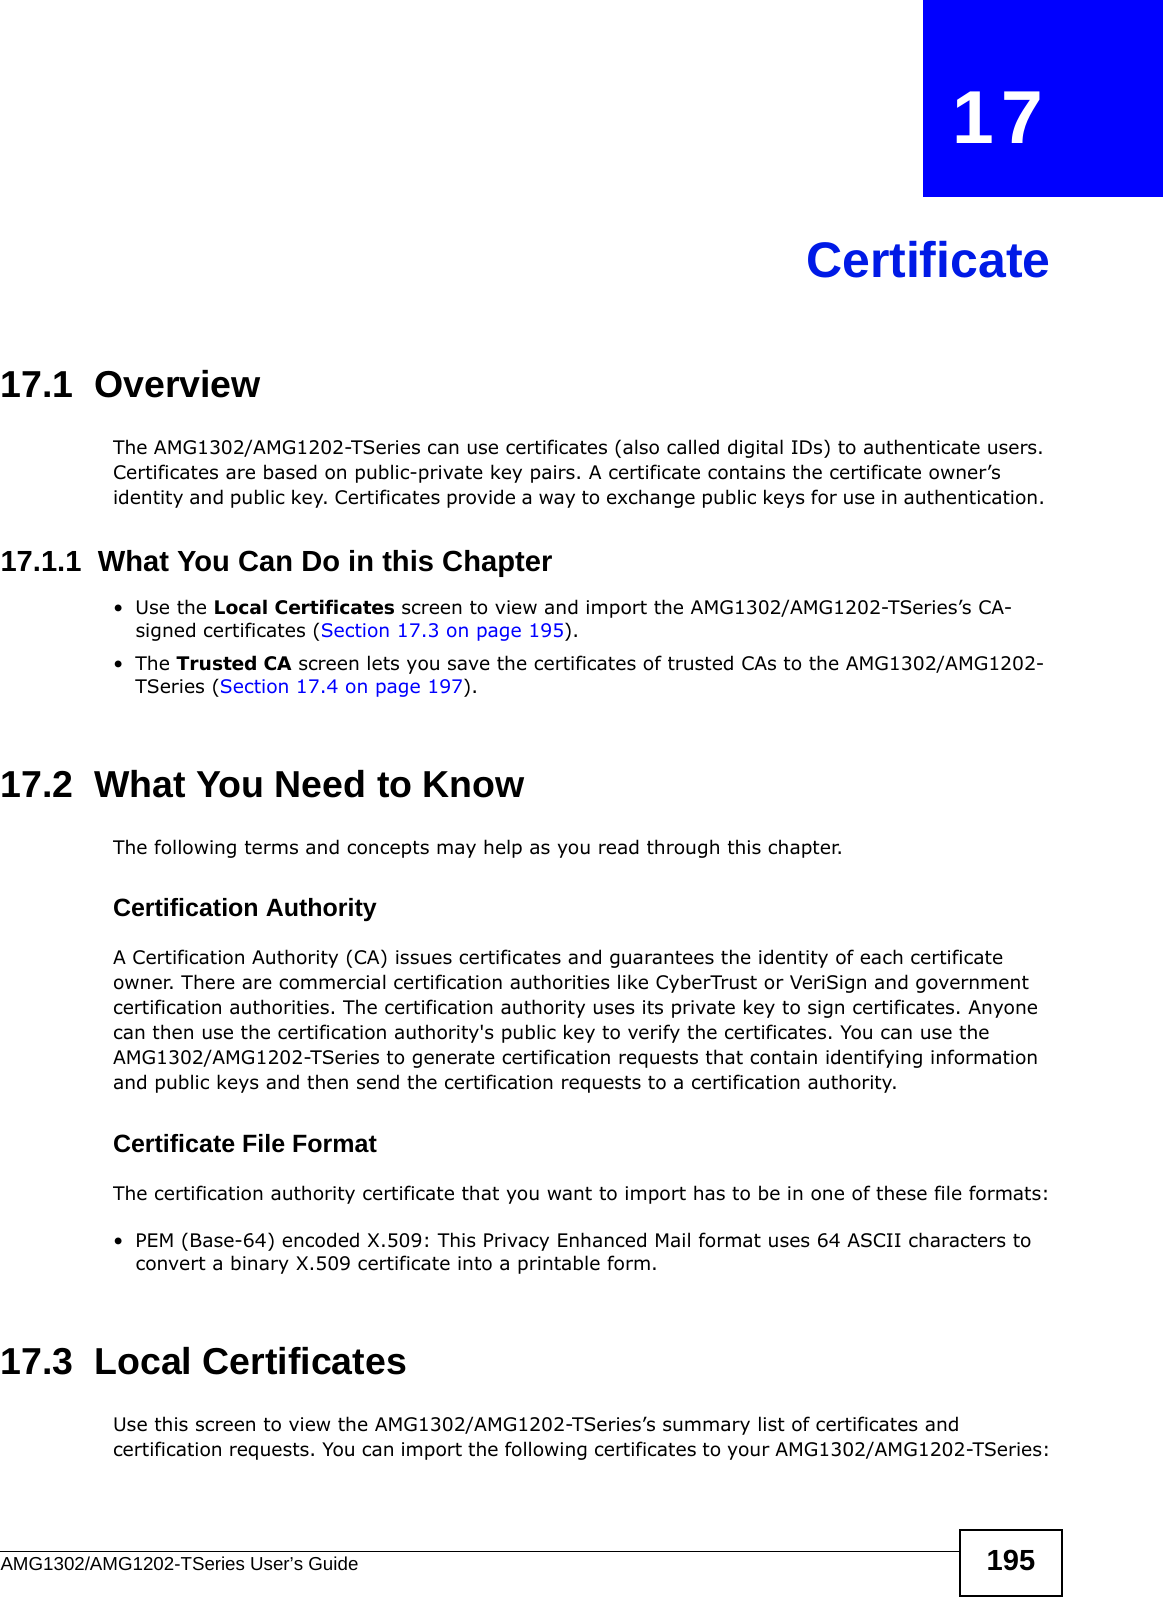 AMG1302/AMG1202-TSeries User’s Guide 195CHAPTER   17Certificate17.1  OverviewThe AMG1302/AMG1202-TSeries can use certificates (also called digital IDs) to authenticate users. Certificates are based on public-private key pairs. A certificate contains the certificate owner’s identity and public key. Certificates provide a way to exchange public keys for use in authentication. 17.1.1  What You Can Do in this Chapter•Use the Local Certificates screen to view and import the AMG1302/AMG1202-TSeries’s CA-signed certificates (Section 17.3 on page 195).•The Trusted CA screen lets you save the certificates of trusted CAs to the AMG1302/AMG1202-TSeries (Section 17.4 on page 197).17.2  What You Need to KnowThe following terms and concepts may help as you read through this chapter.Certification Authority A Certification Authority (CA) issues certificates and guarantees the identity of each certificate owner. There are commercial certification authorities like CyberTrust or VeriSign and government certification authorities. The certification authority uses its private key to sign certificates. Anyone can then use the certification authority&apos;s public key to verify the certificates. You can use the AMG1302/AMG1202-TSeries to generate certification requests that contain identifying information and public keys and then send the certification requests to a certification authority.Certificate File FormatThe certification authority certificate that you want to import has to be in one of these file formats:• PEM (Base-64) encoded X.509: This Privacy Enhanced Mail format uses 64 ASCII characters to convert a binary X.509 certificate into a printable form.17.3  Local CertificatesUse this screen to view the AMG1302/AMG1202-TSeries’s summary list of certificates and certification requests. You can import the following certificates to your AMG1302/AMG1202-TSeries: